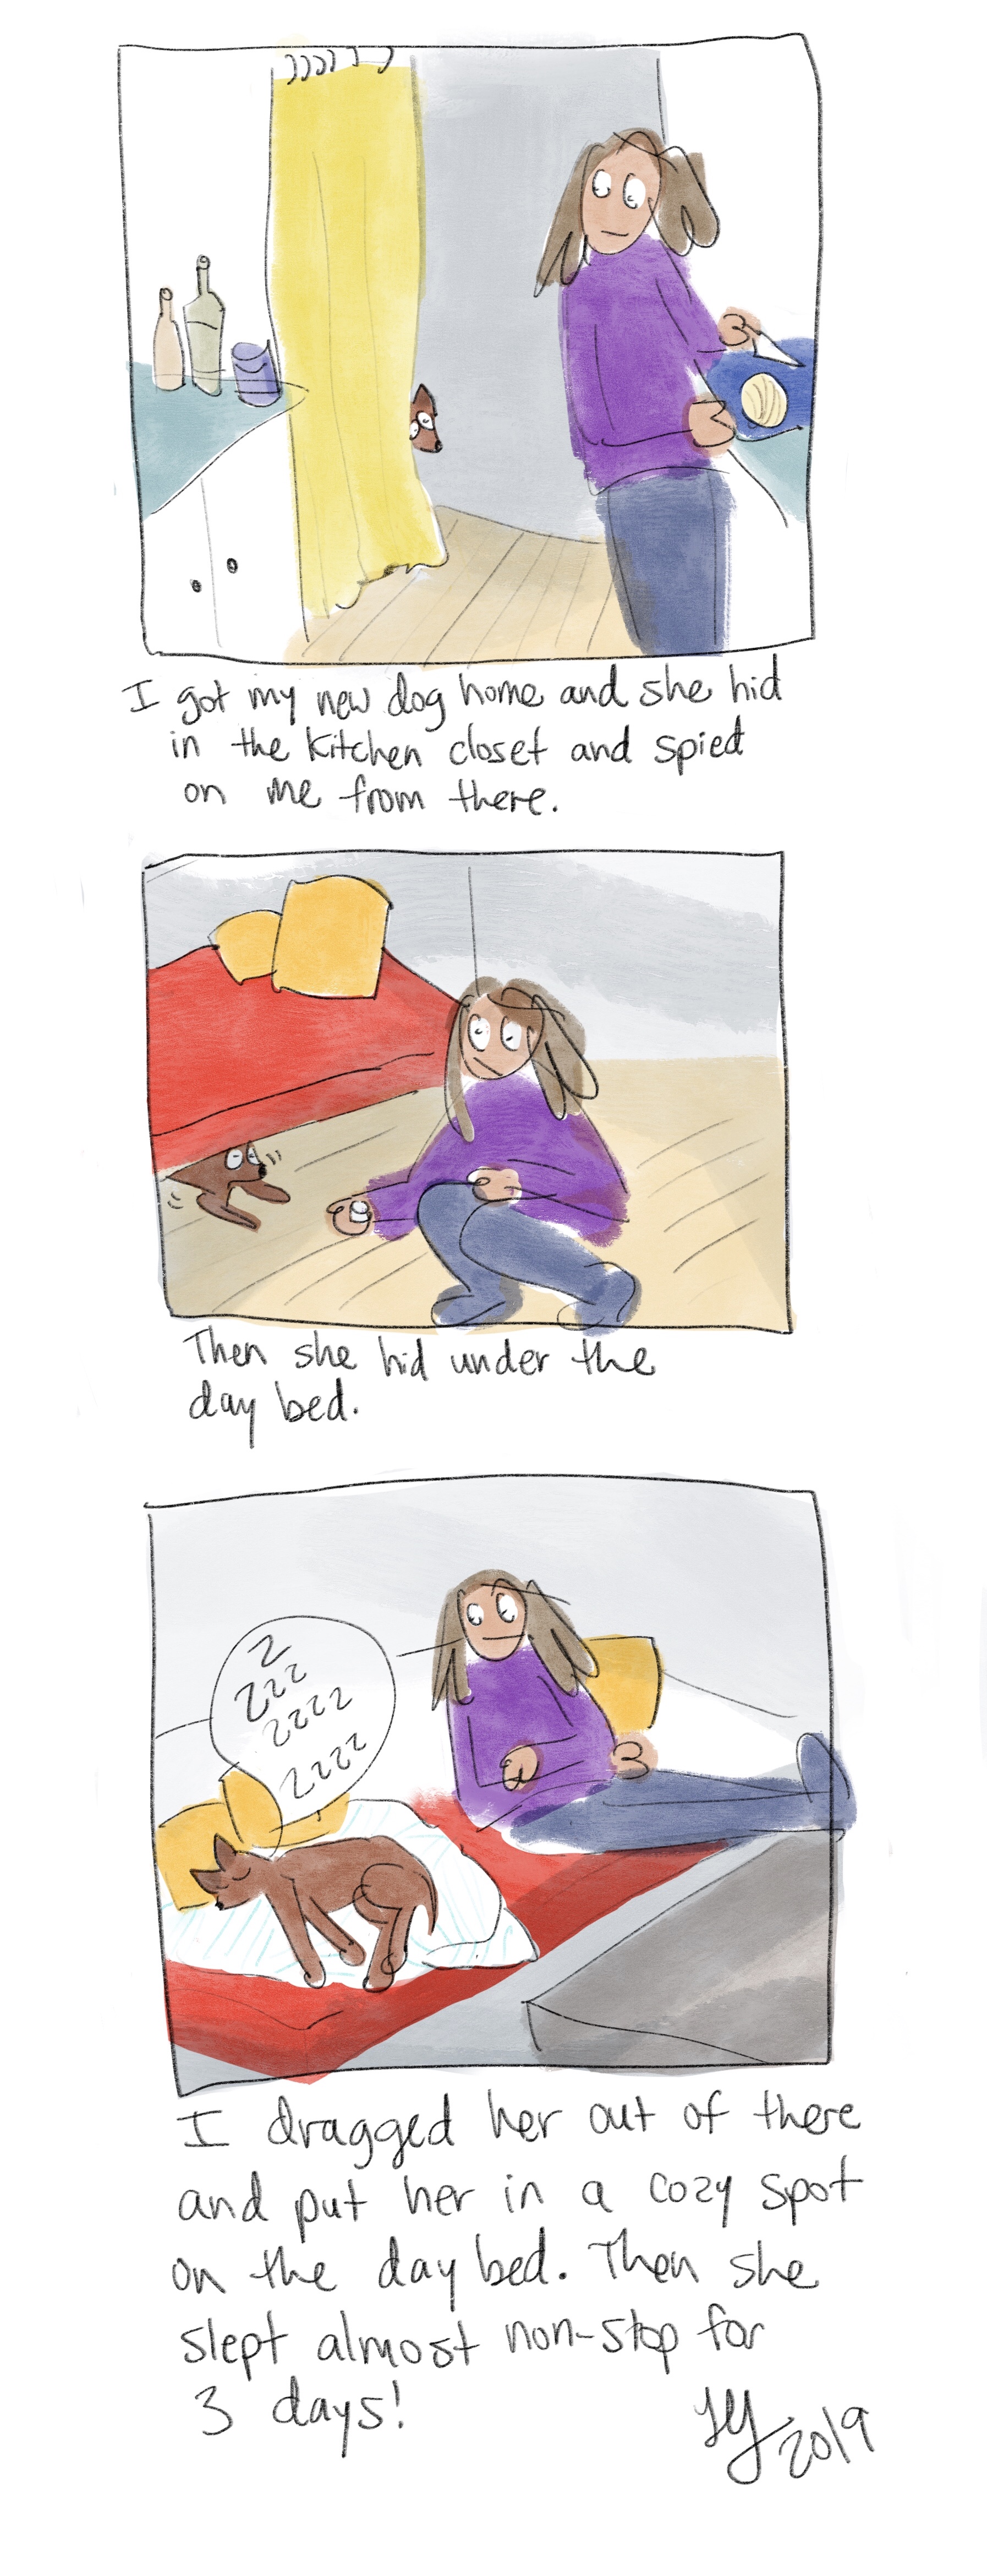 I recently adopted a little dog from Chicago Canine Rescue. She looks like a little Fox. I made this comic about her. She likes to hide and stare at me. Once I put her in a cozy place she passed out and slept for days!